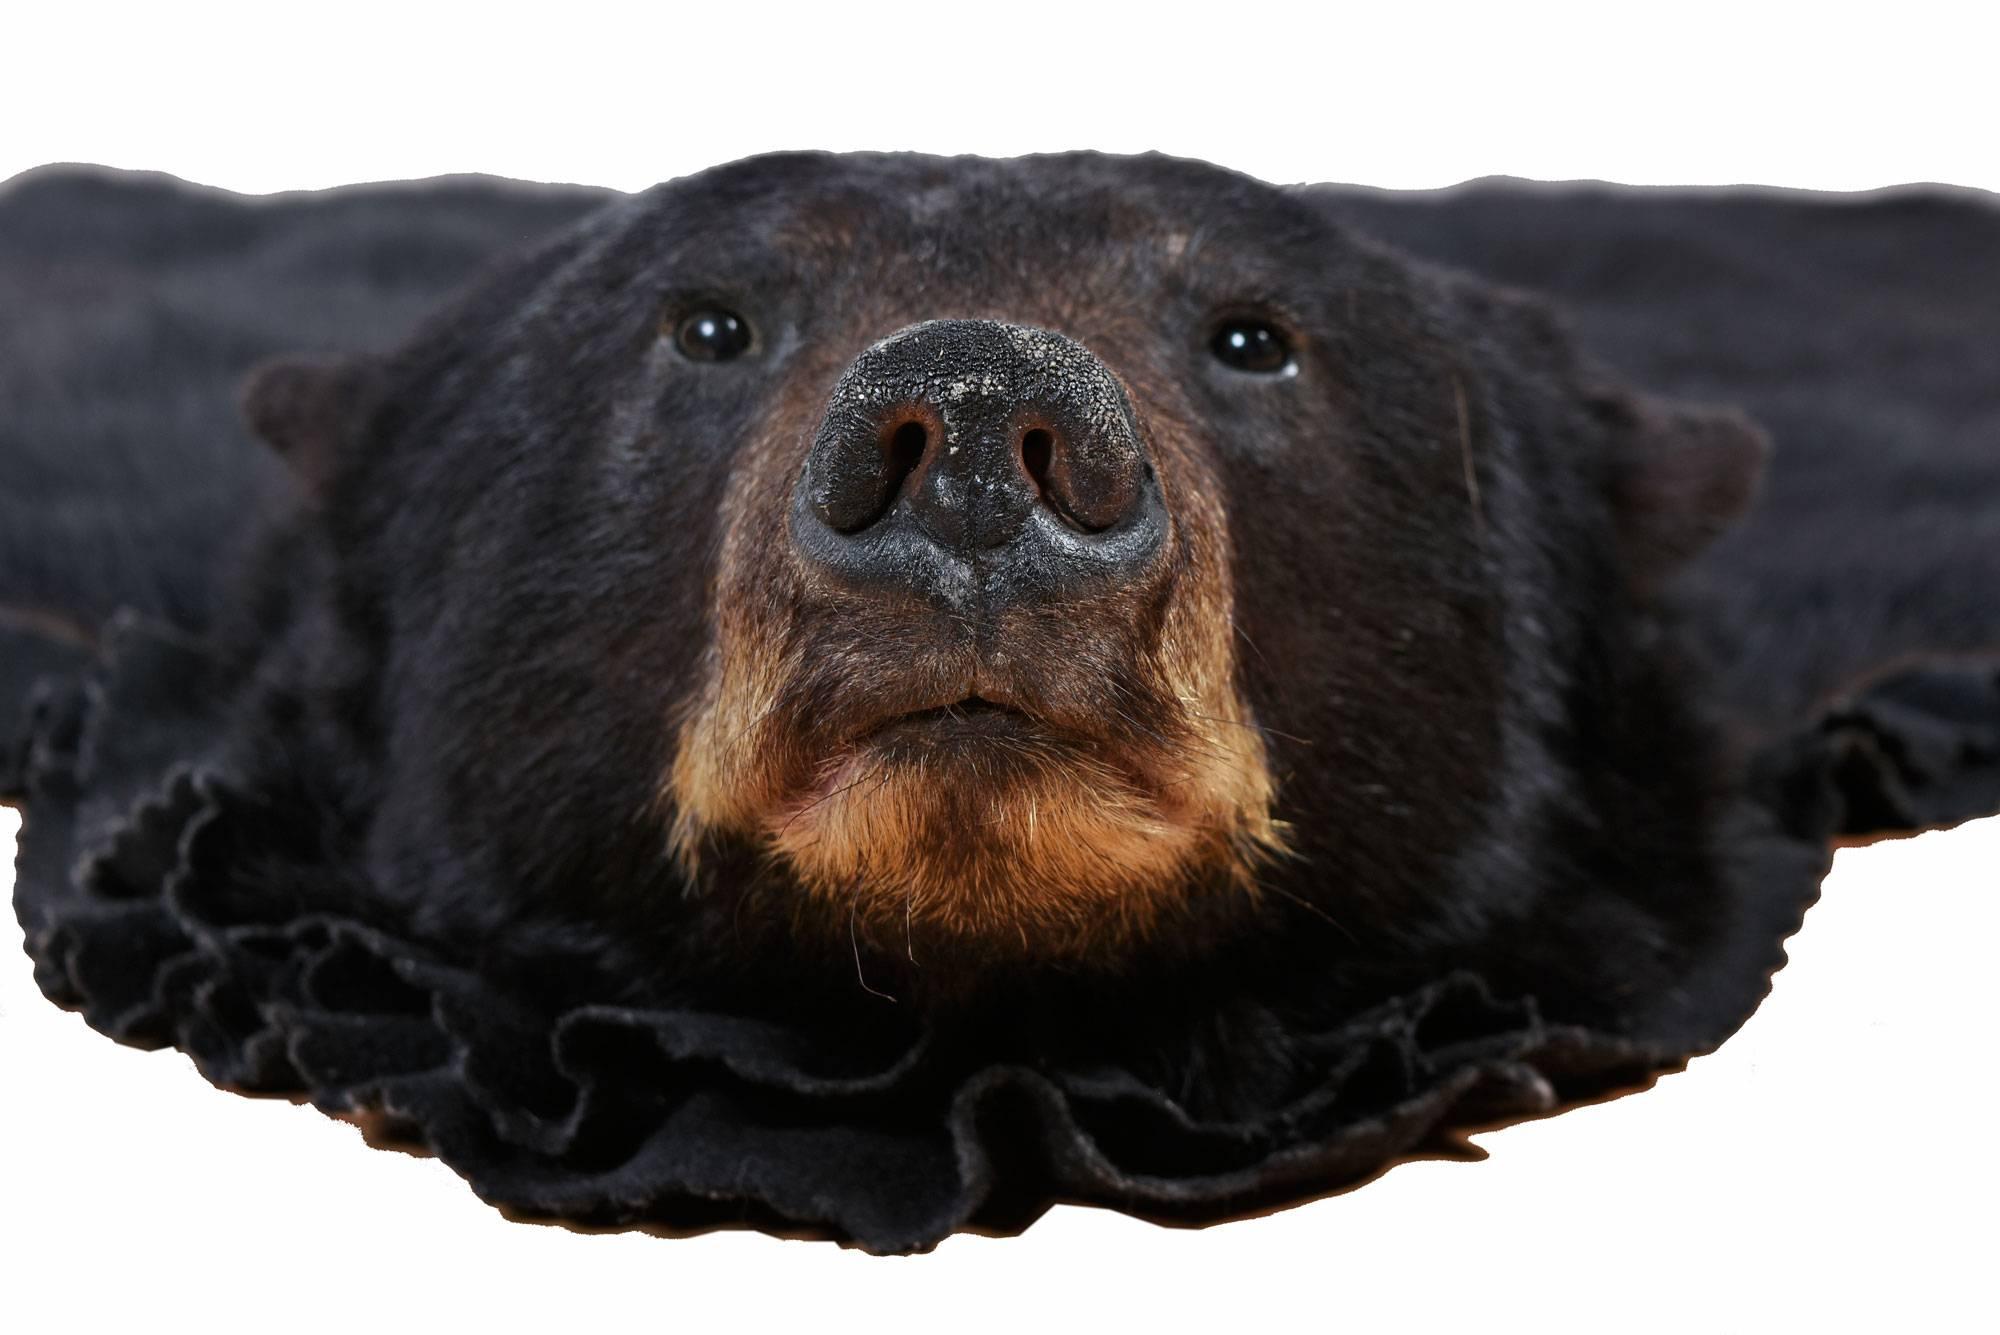 Authentic taxidermy mounted American black bear skin rug. This piece was commissioned by the owner, who lived in North Carolina's Blue Ridge Mountains, an area highly populated with black bears. This bear skin rug is nicely mounted, no bald spots